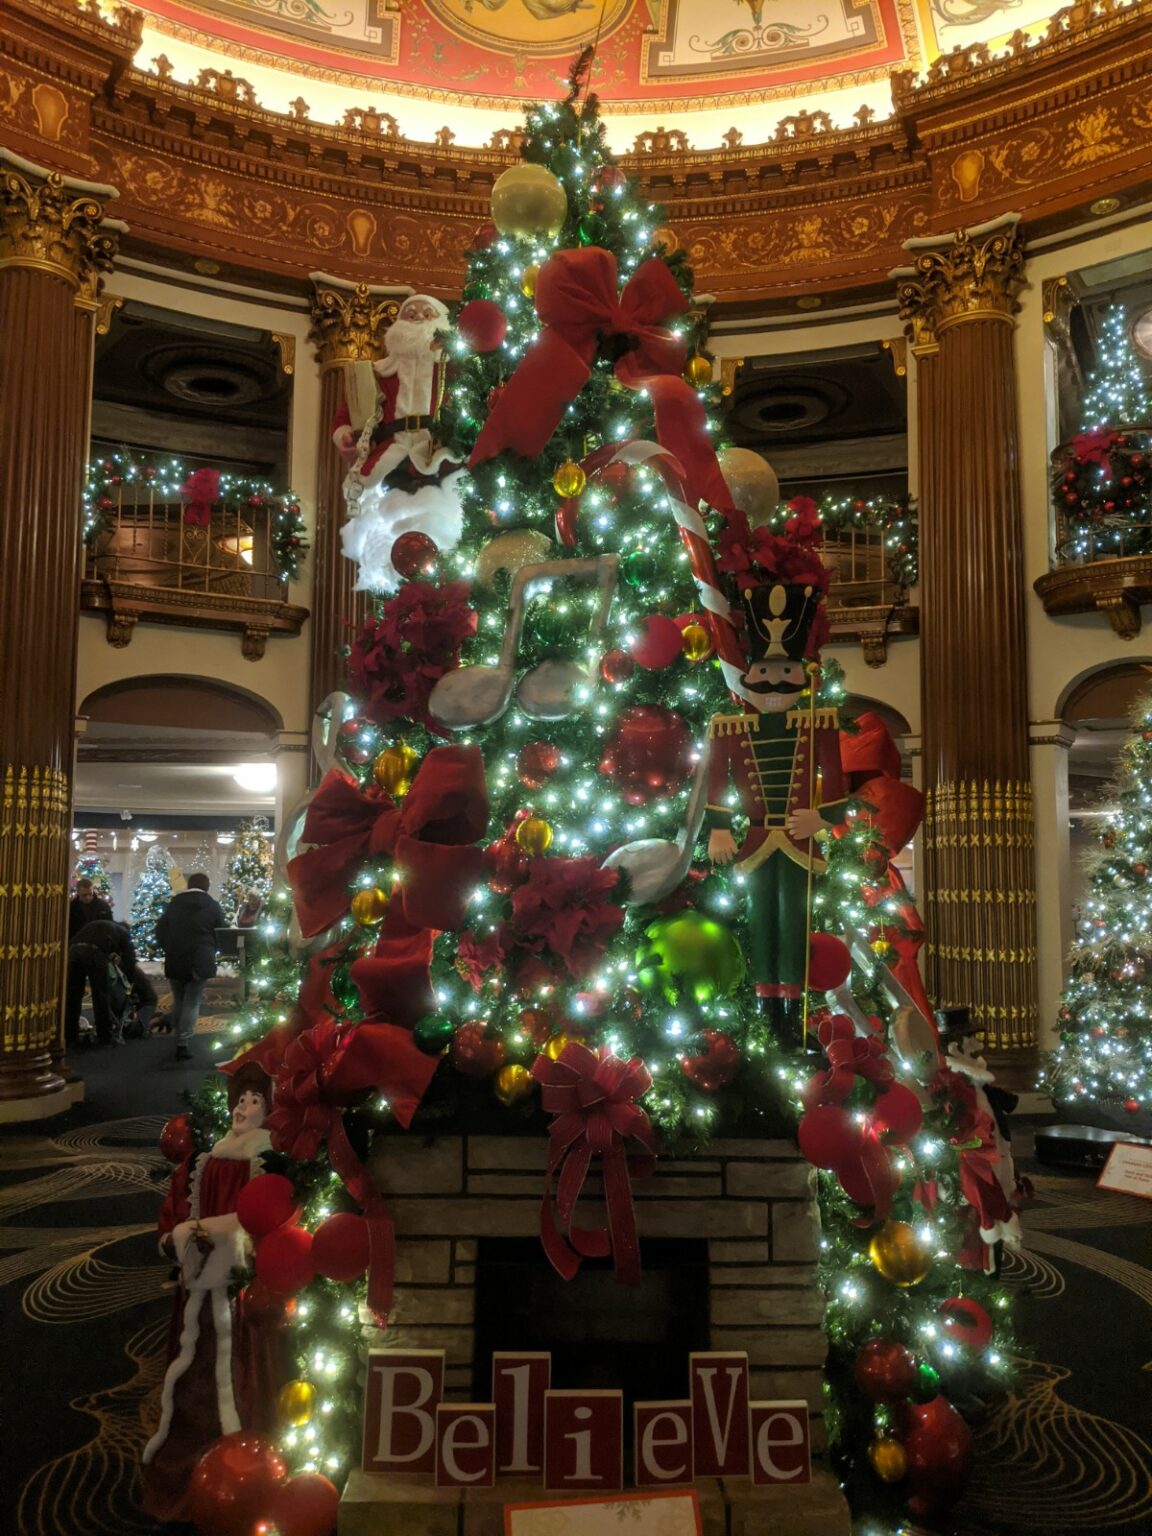 Festival of Trees at the Allen Tours of Cleveland, LLC